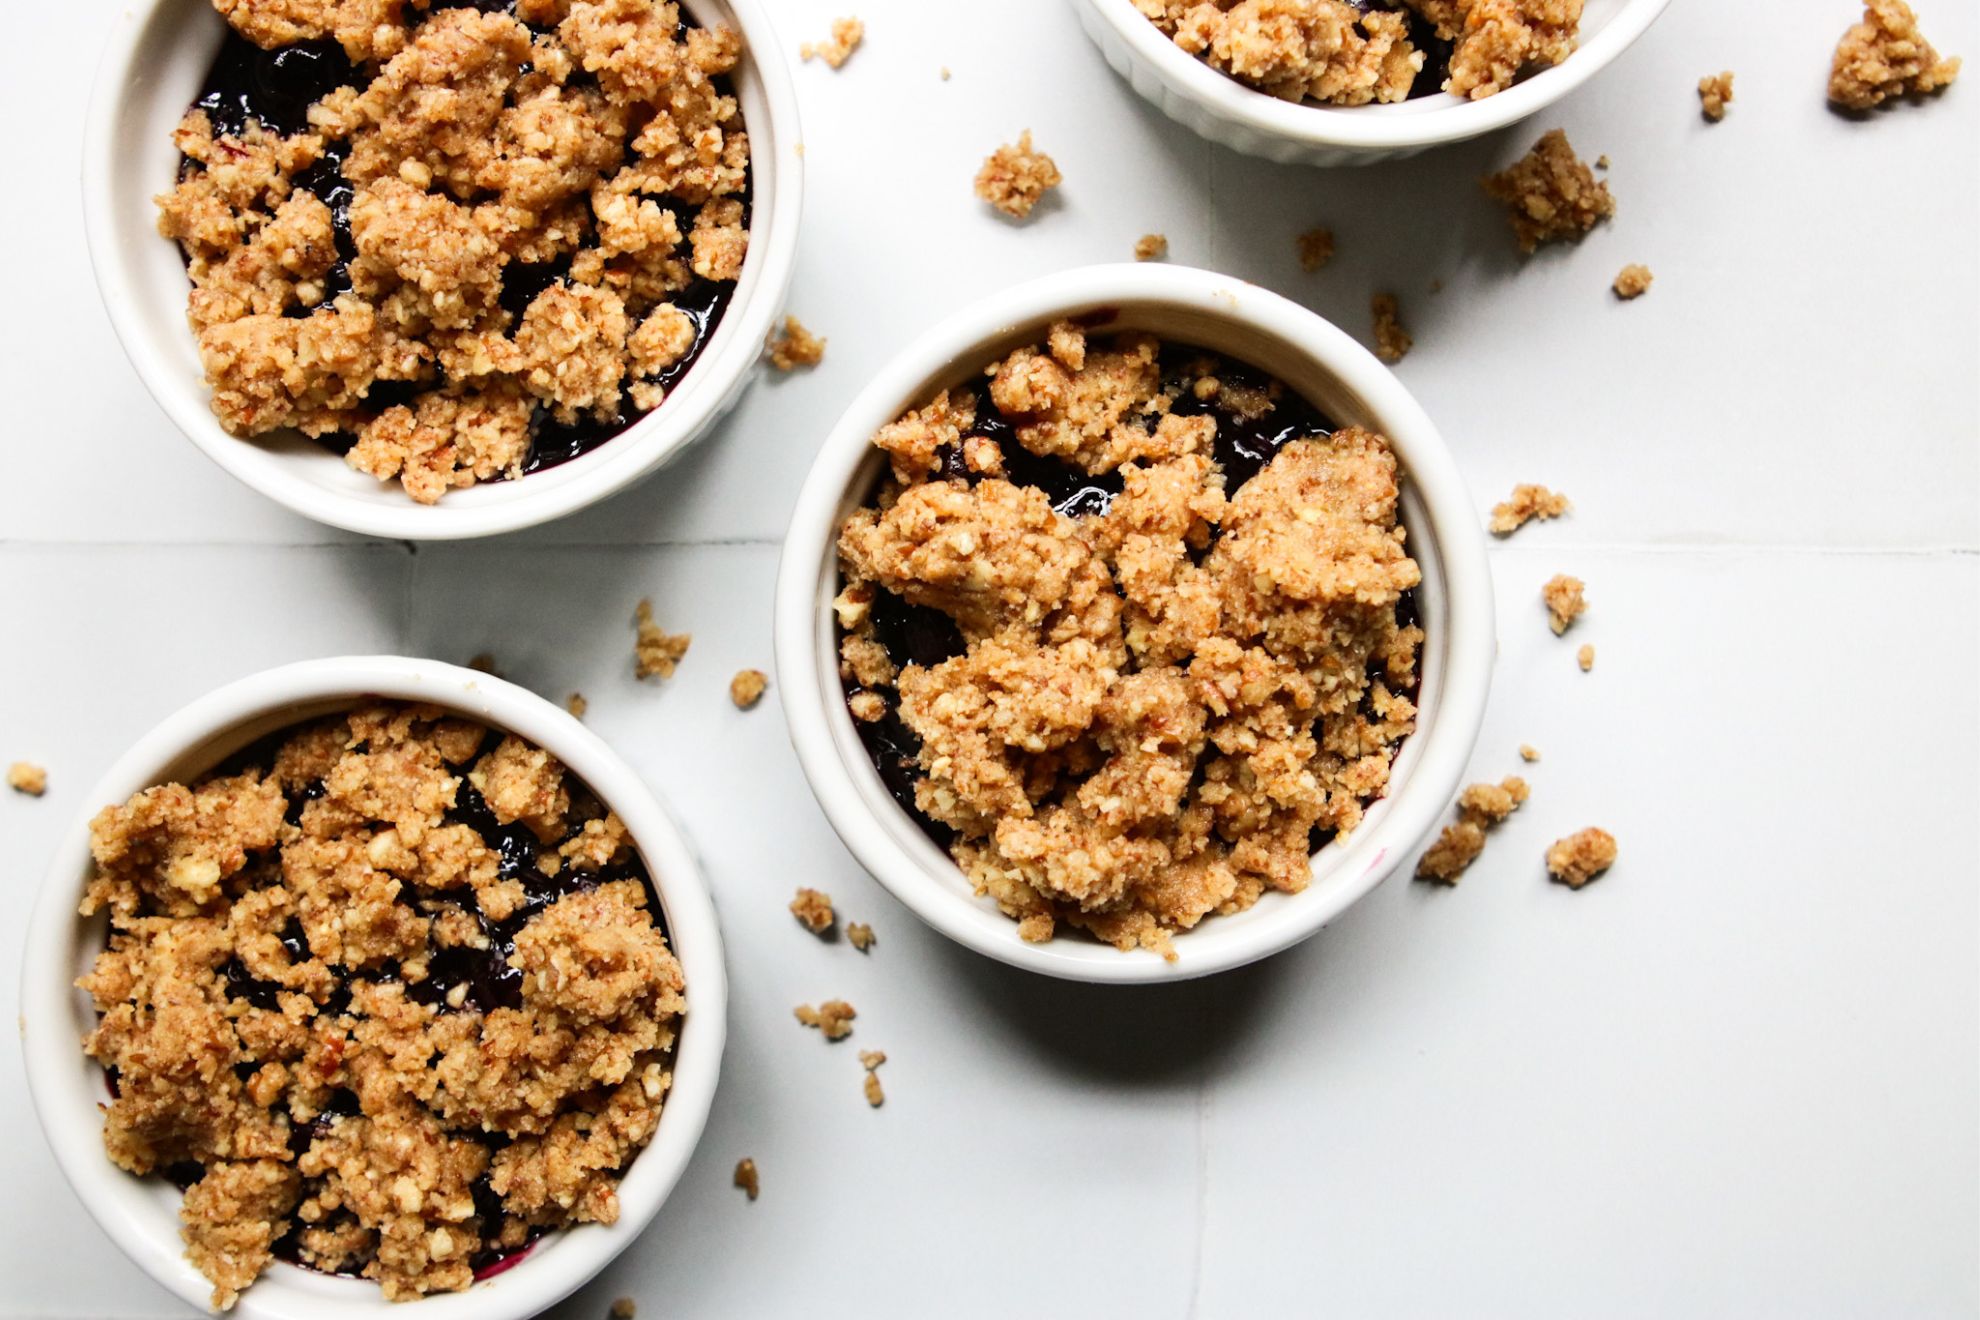 This is an overhead horizontal image of four small white ramekins with a nutty crumble on top. Peeking through the nutty crisp is a blueberry glaze. The ramekins sit on a white square tiled surface with more crumbles that have fallen around them.